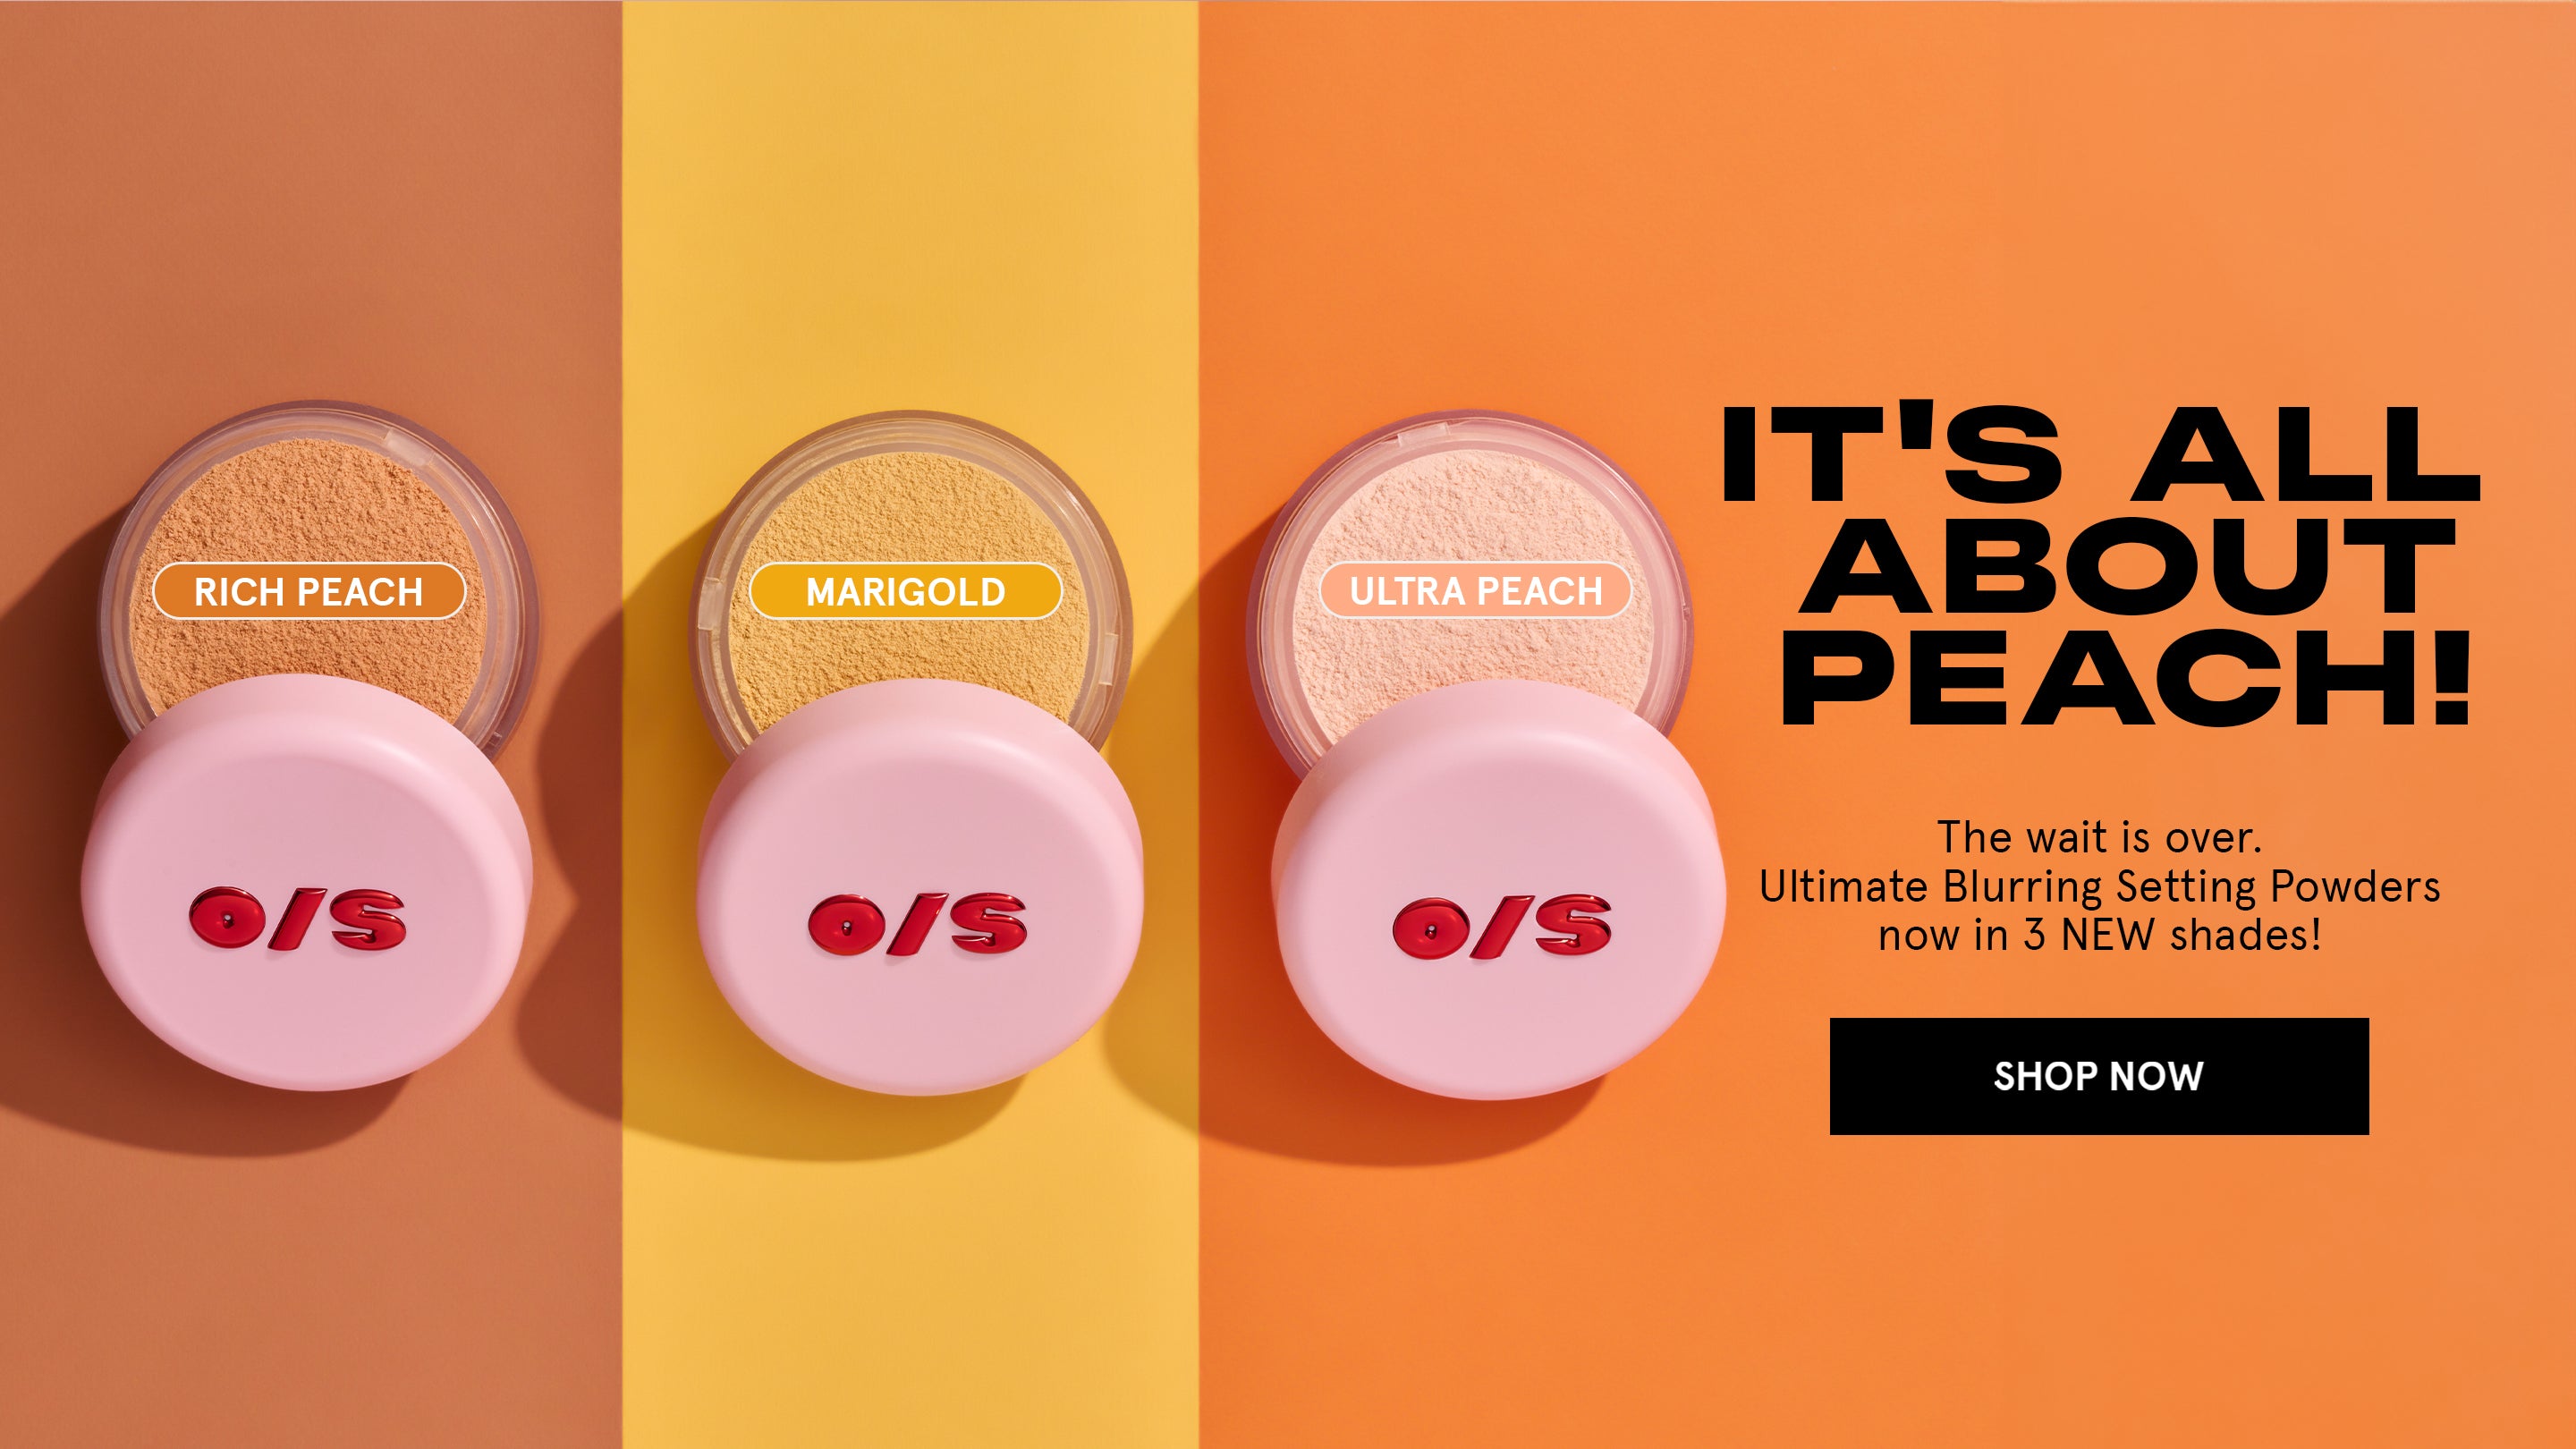 Its all about peach! Ultimate Blurring Setting Powder is now here in 3 new shades!